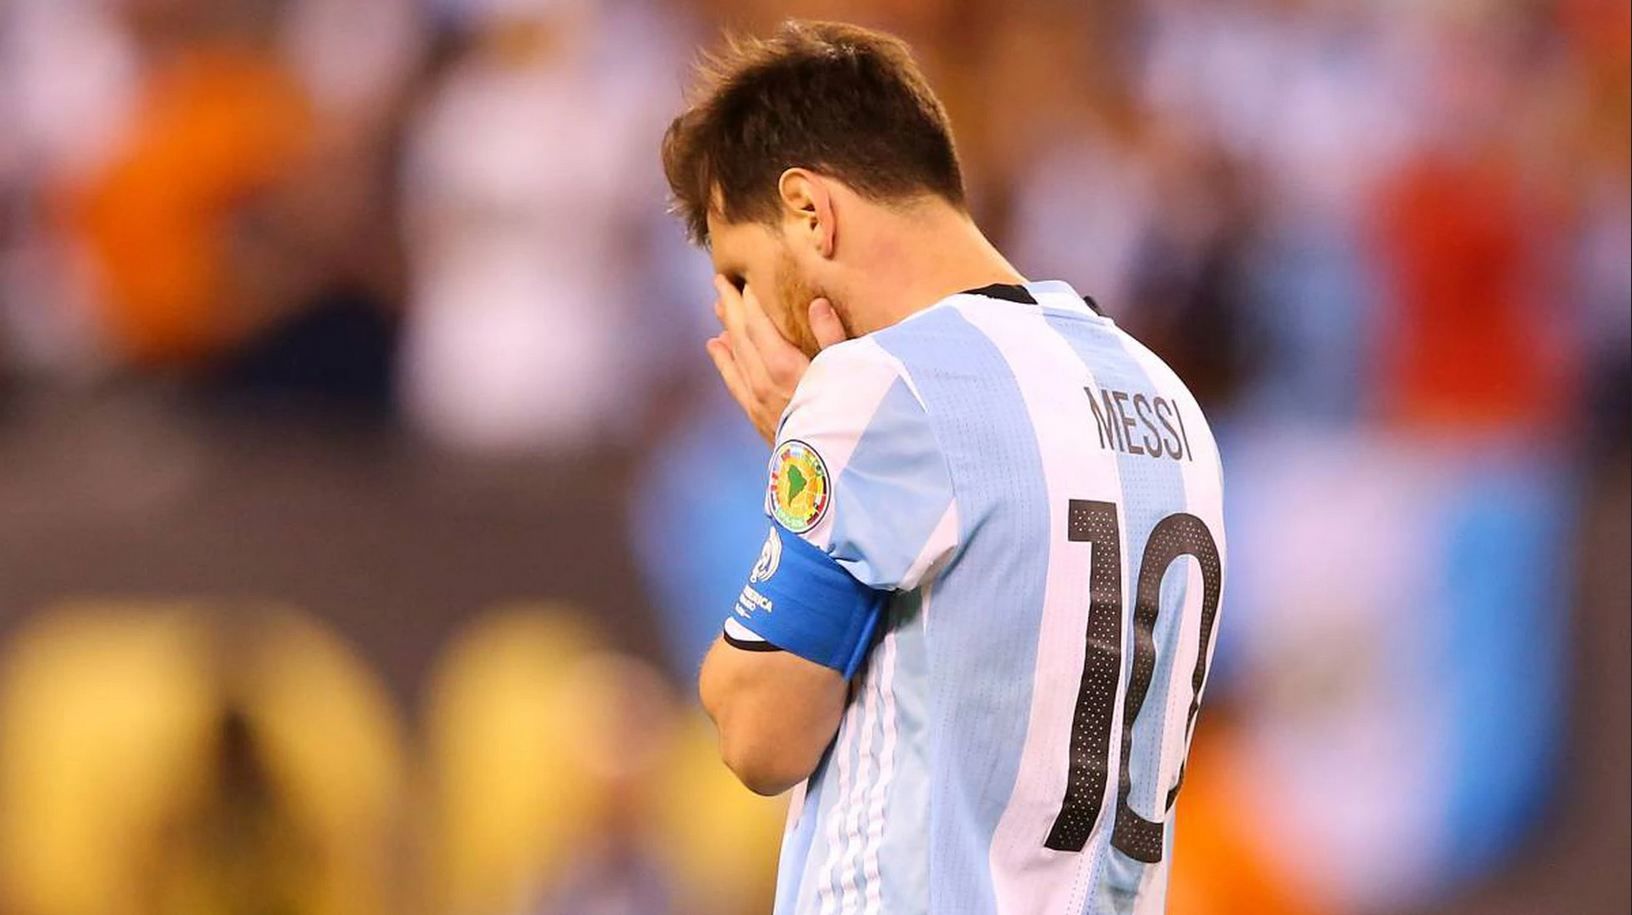 Journalist Morgan thinks France will win the World Cup and break Messi's heart